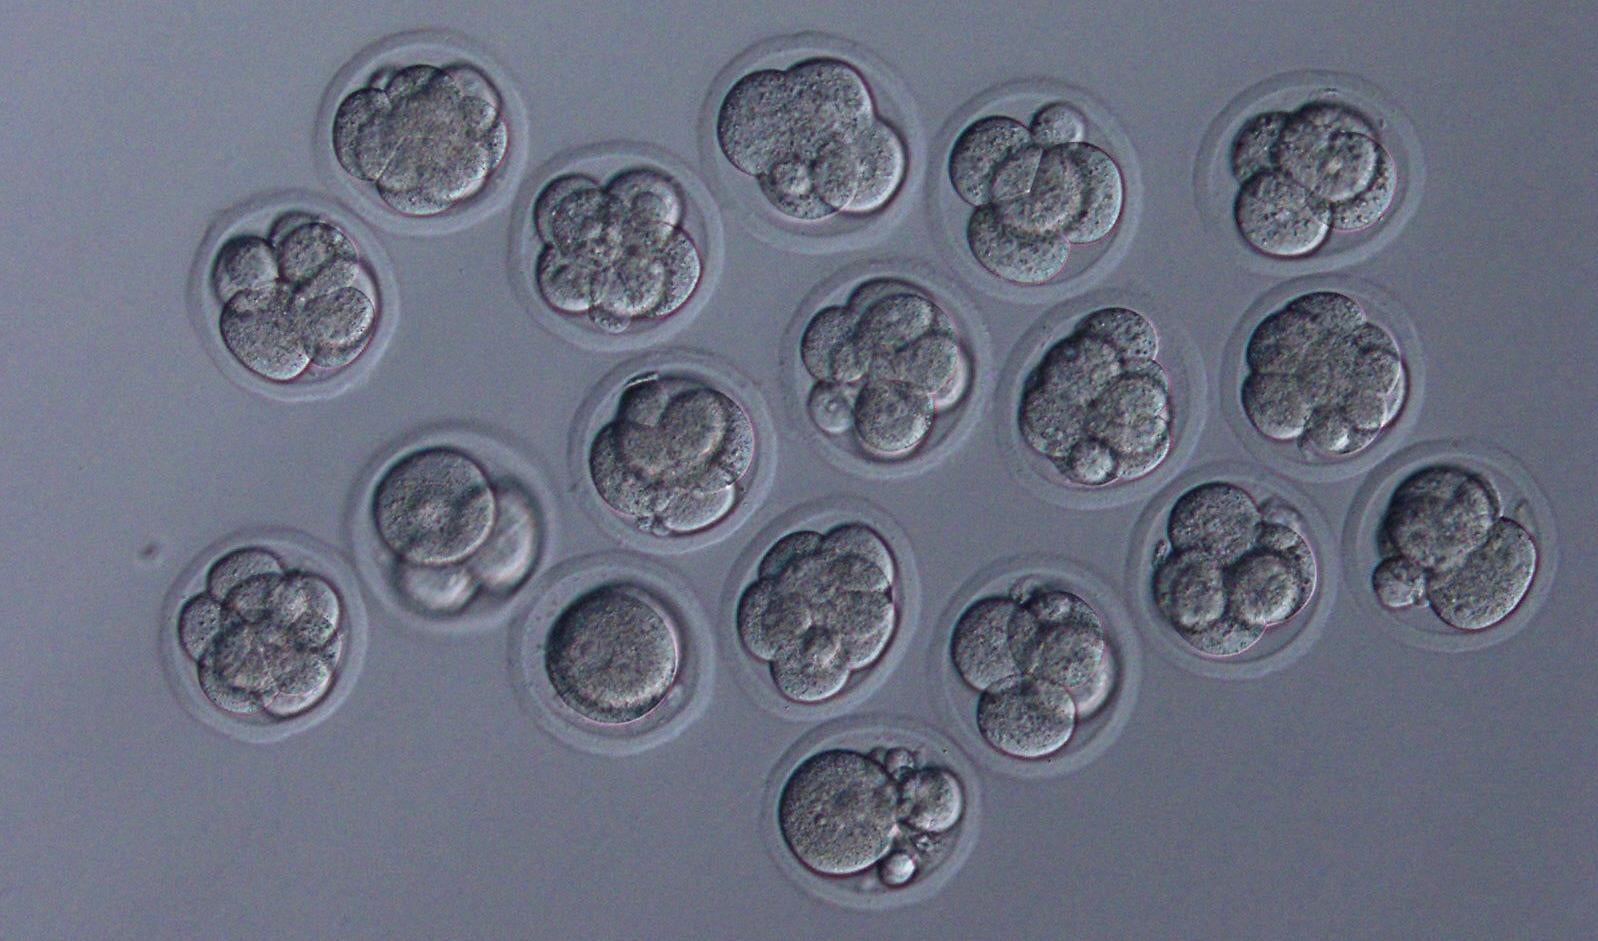 Embryos cultured to demonstrate whether those embryos can develop normally. This image shows good quality 8-cell stage embryos derived from the space sperm. (Image: Teruhiko Wakayama, University of Yamanashi)